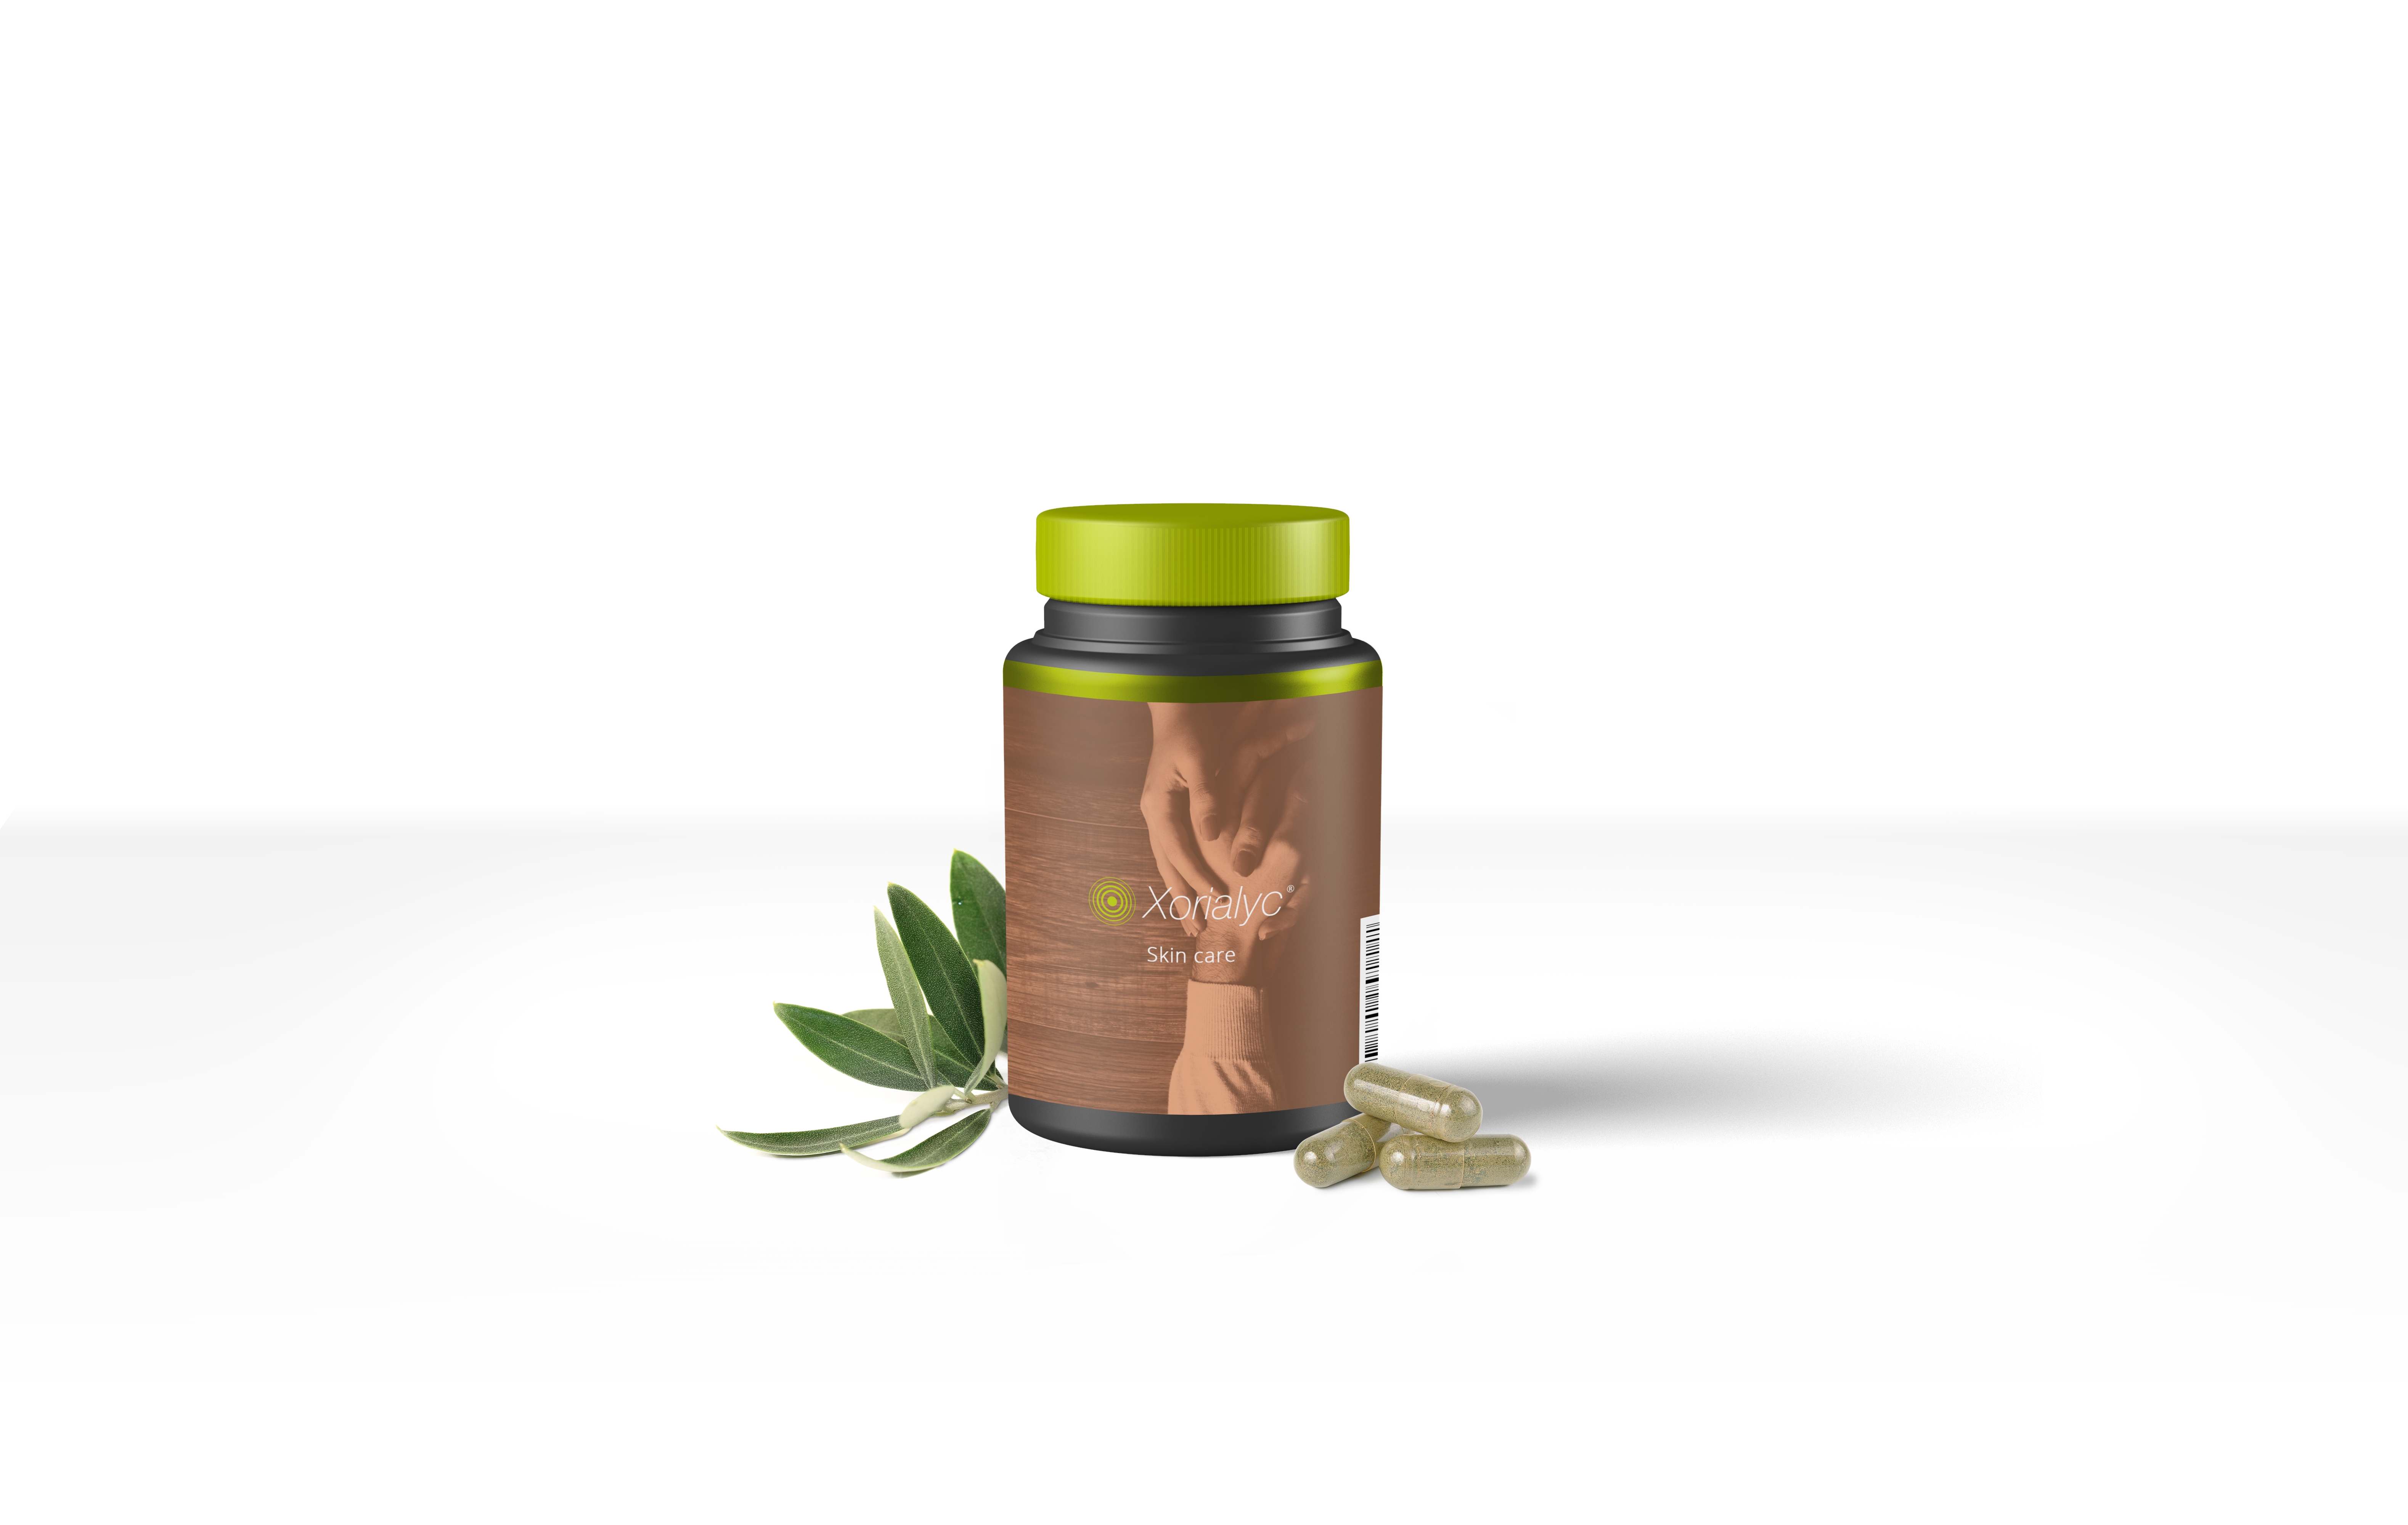 Xorialyc®. SKIN INFLAMMATION - OLIVE LEAF EXTRACT